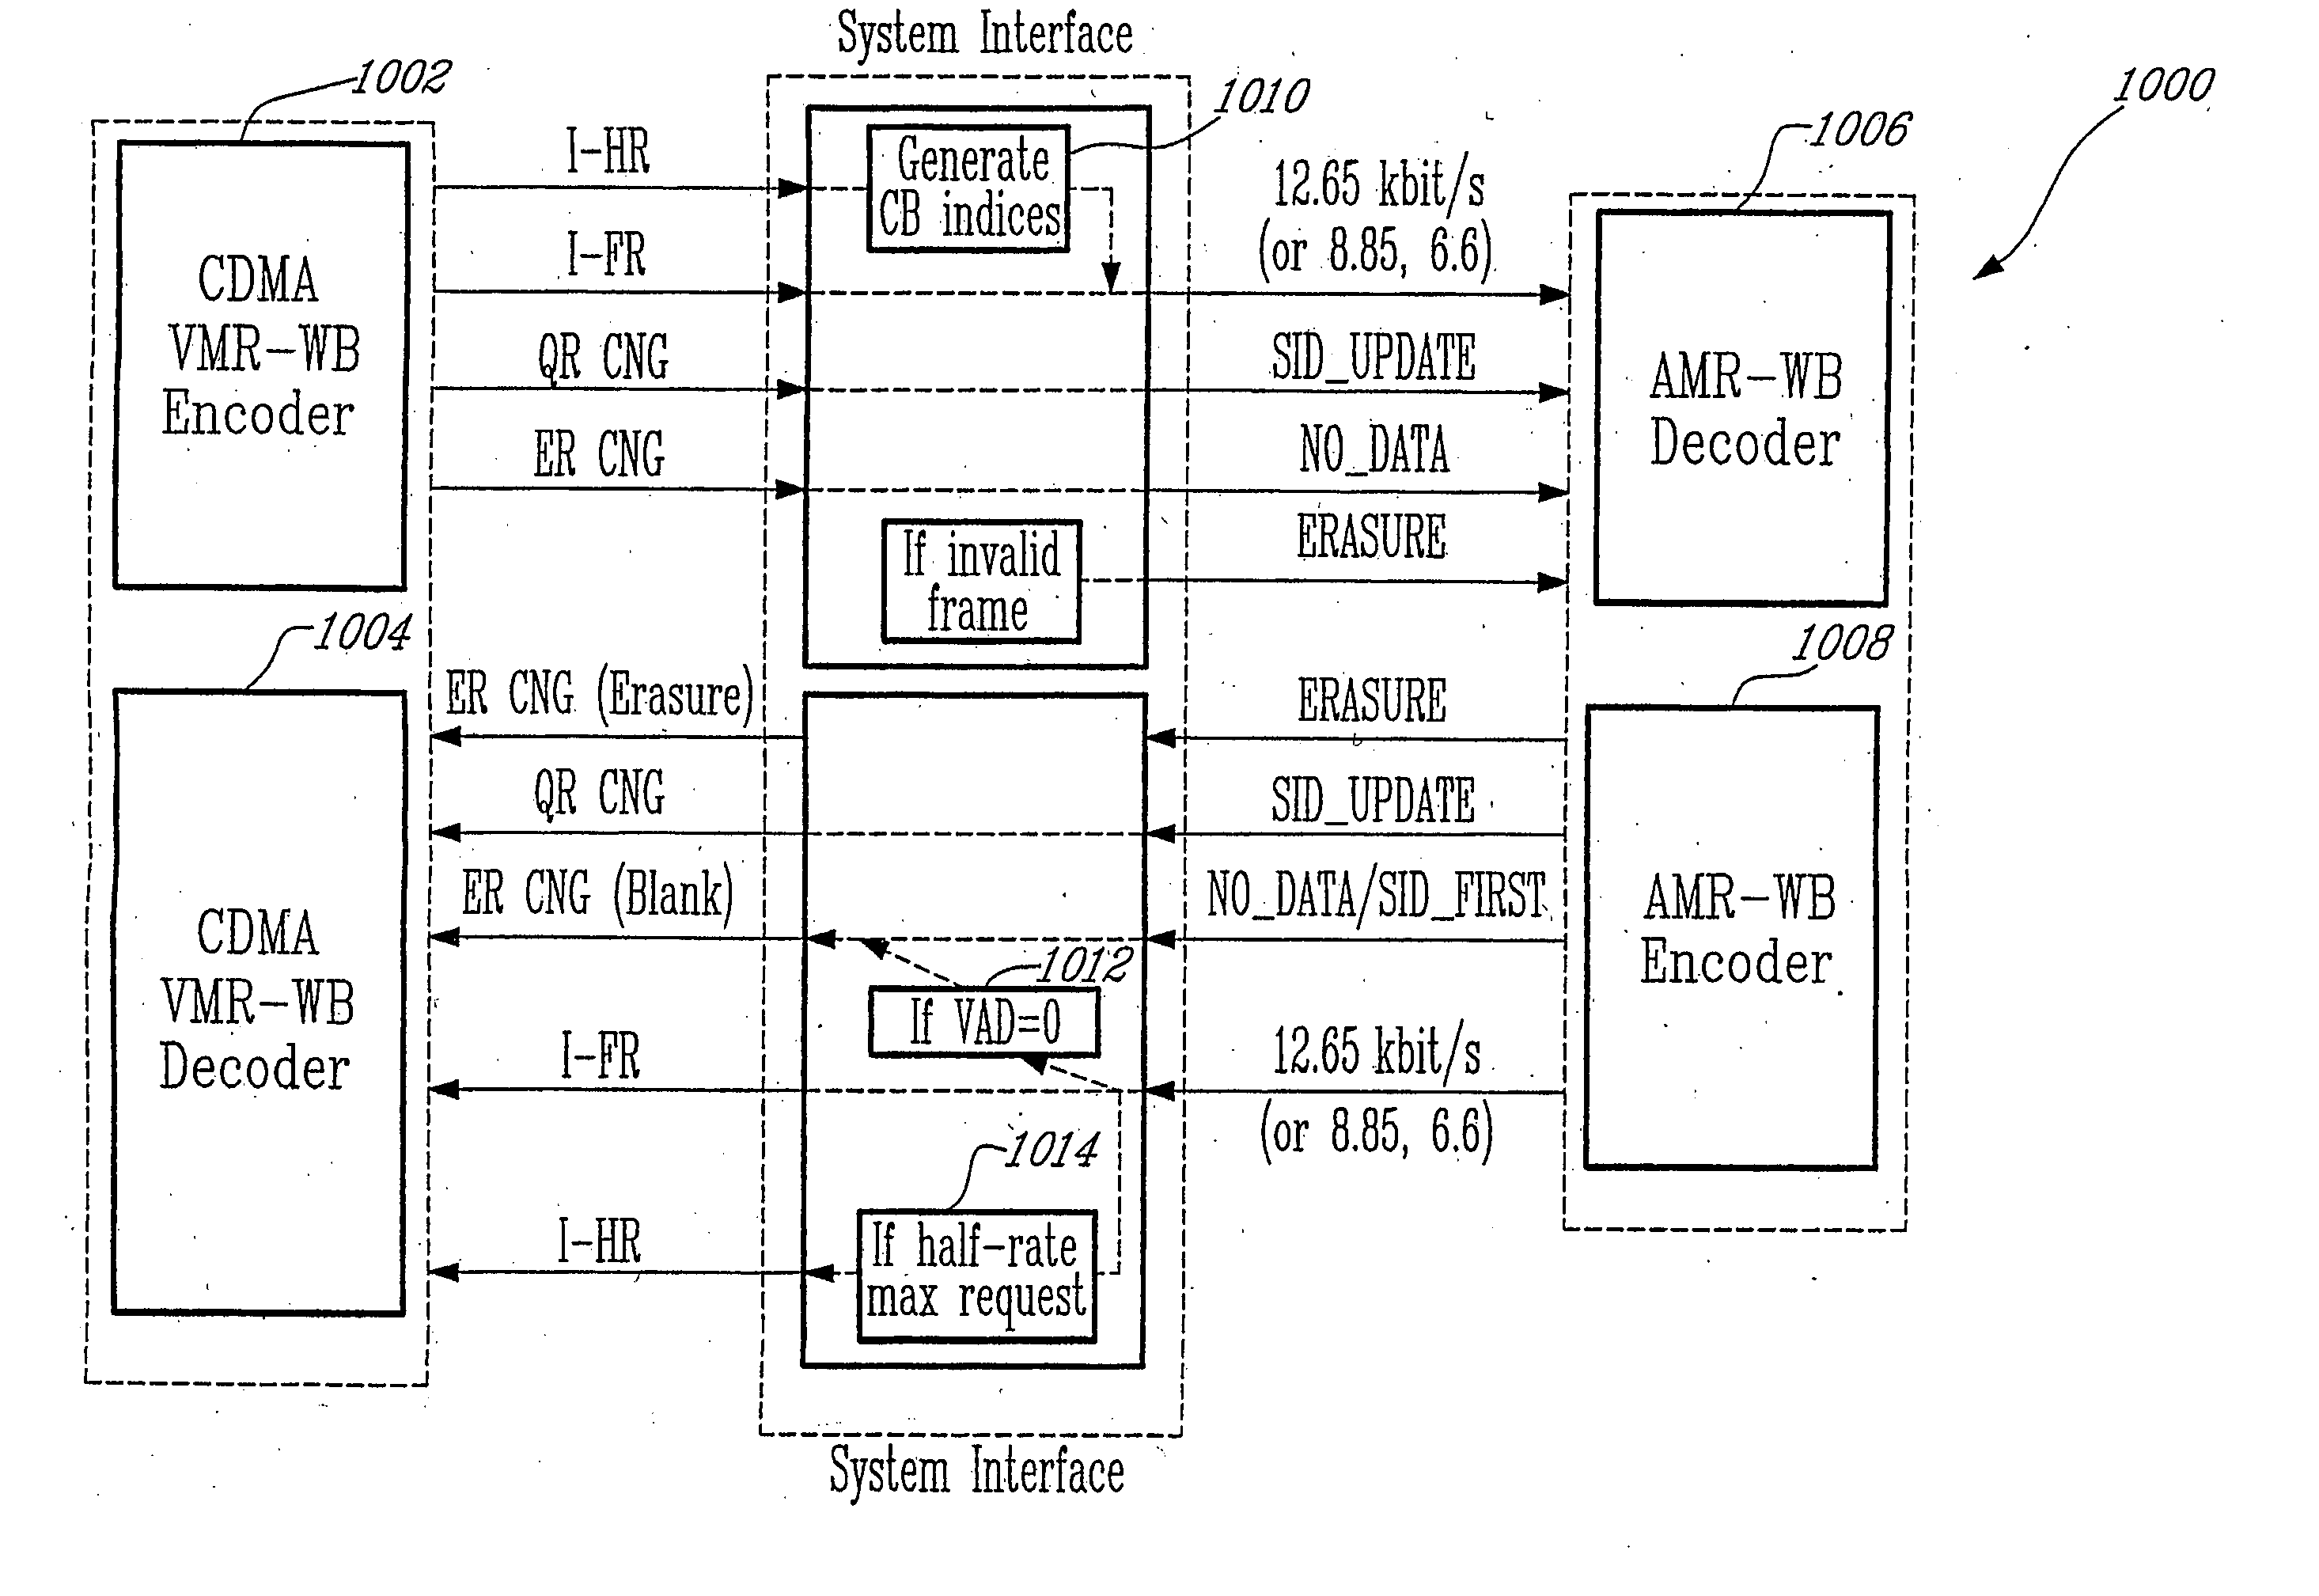 Method for interoperation between adaptive multi-rate wideband (AMR-WB) and multi-mode variable bit-rate wideband (VMR-WB) codecs